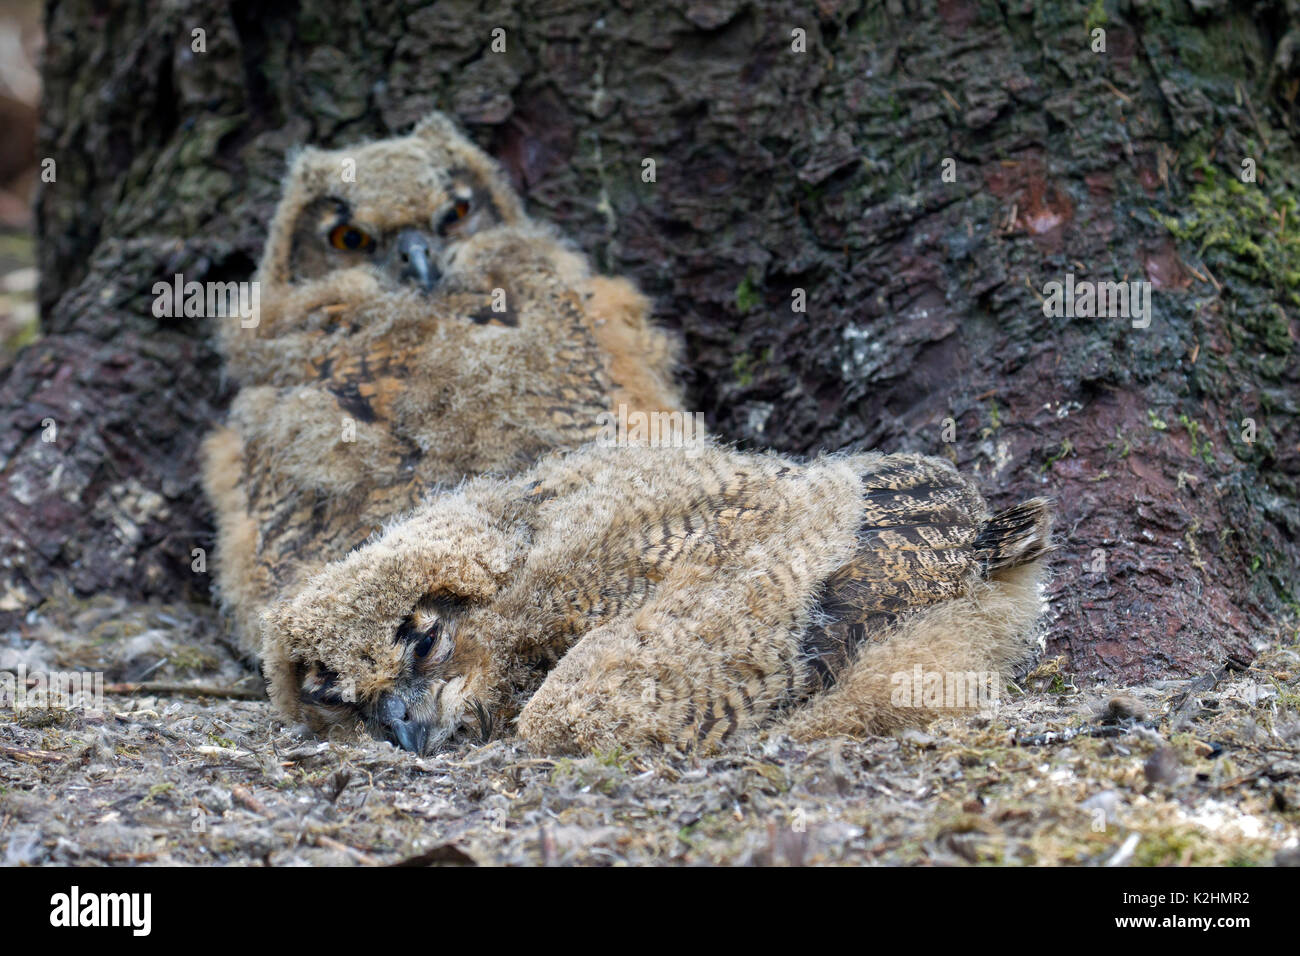 Two Eurasian eagle owl (Bubo bubo) chicks / owlets in exposed nest on the ground at base of pine tree in coniferous forest Stock Photo